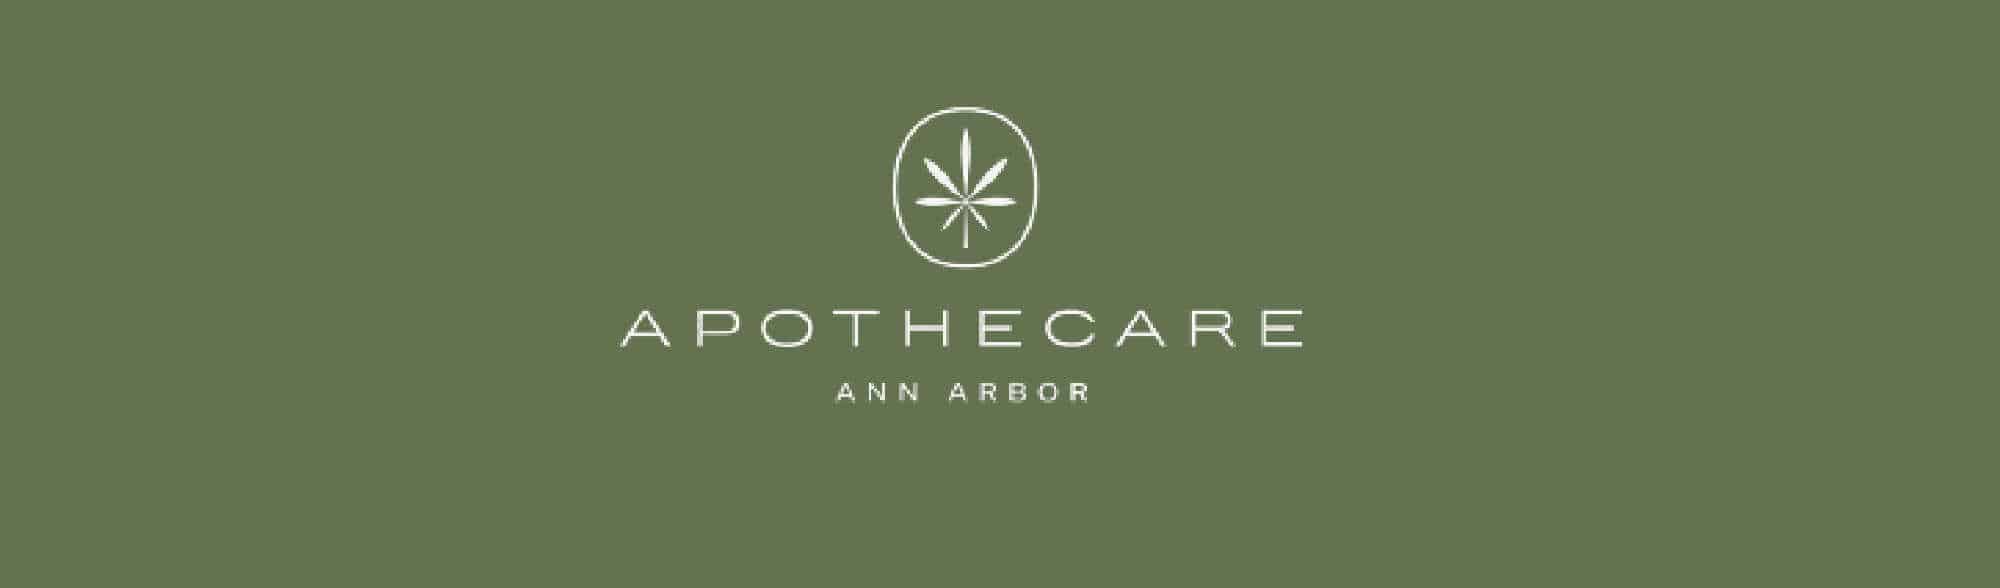 image of apothecare weed dispensary logo